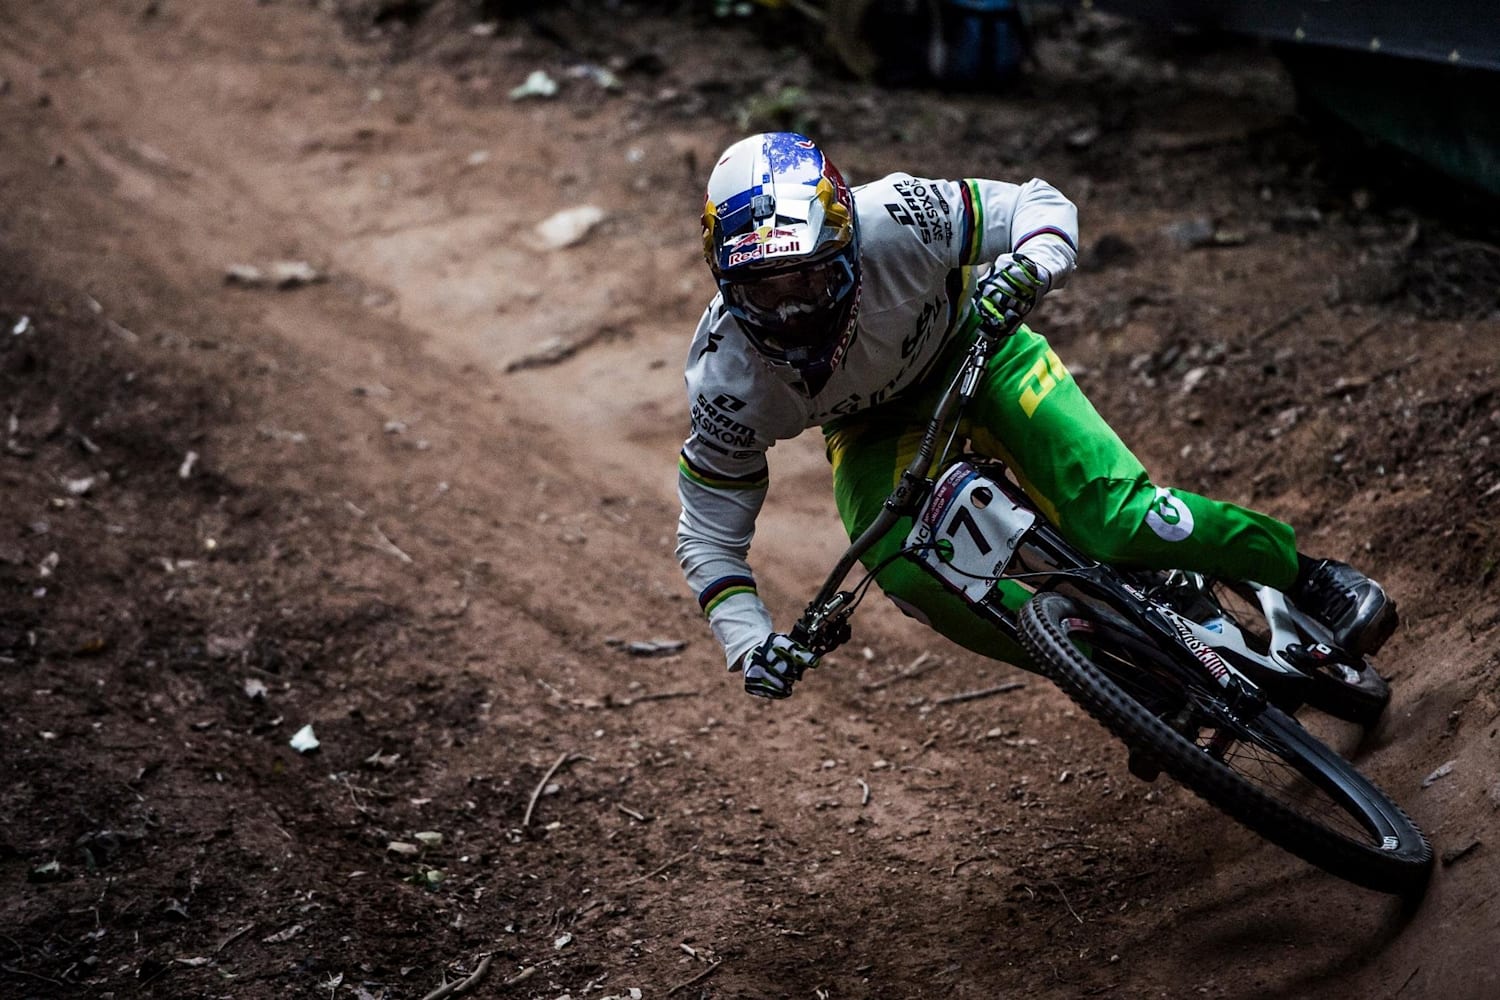 Results and downhill race action from Cairns